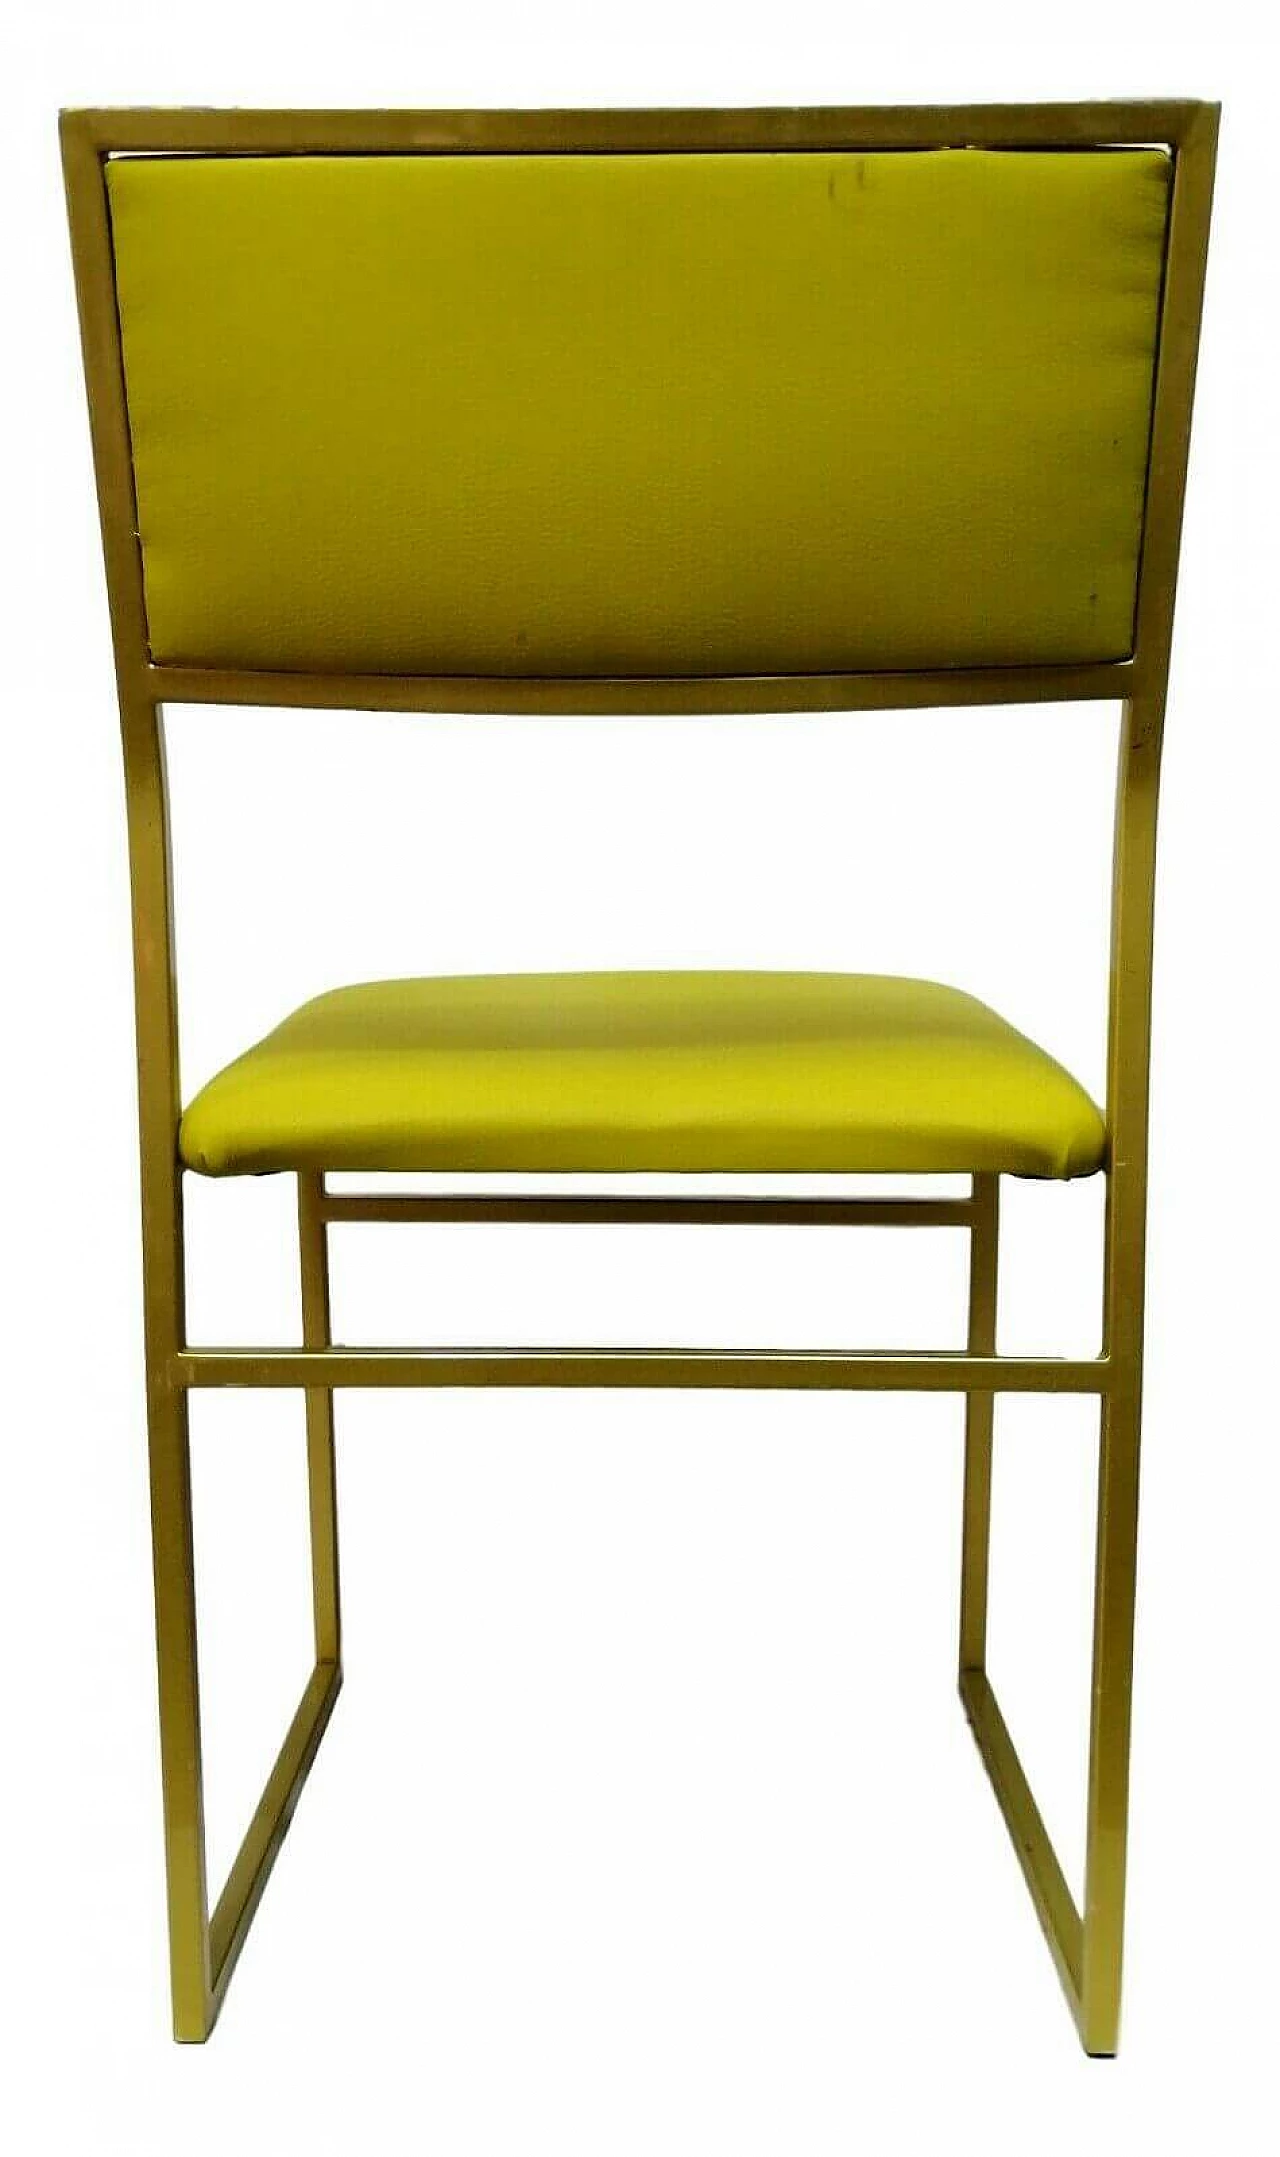 Metal chair and acid green seat, 70s 1166245